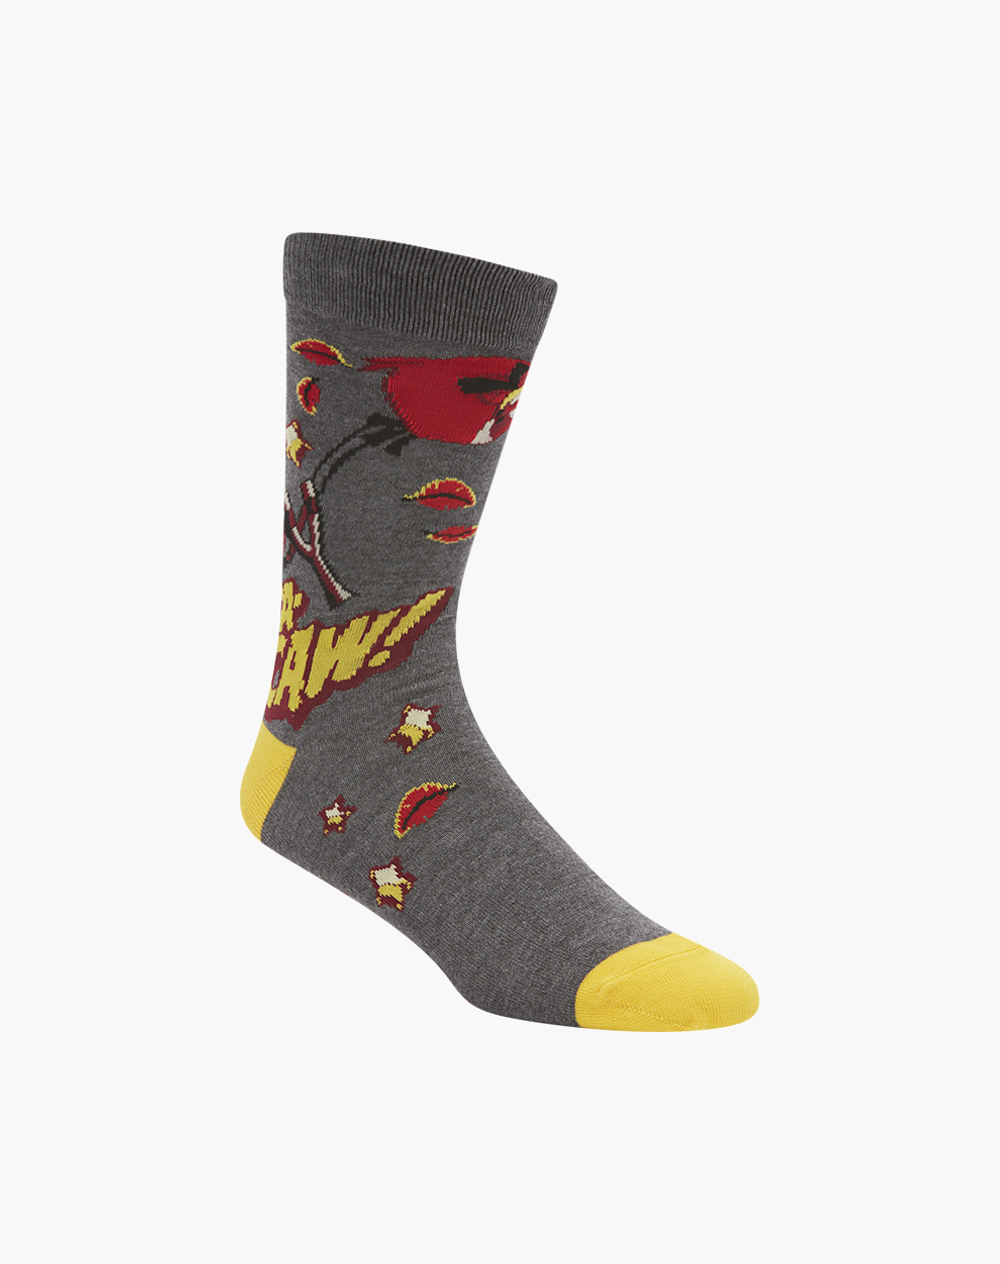 MENS ANGRY BIRDS CACAW BAMBOO SOCK